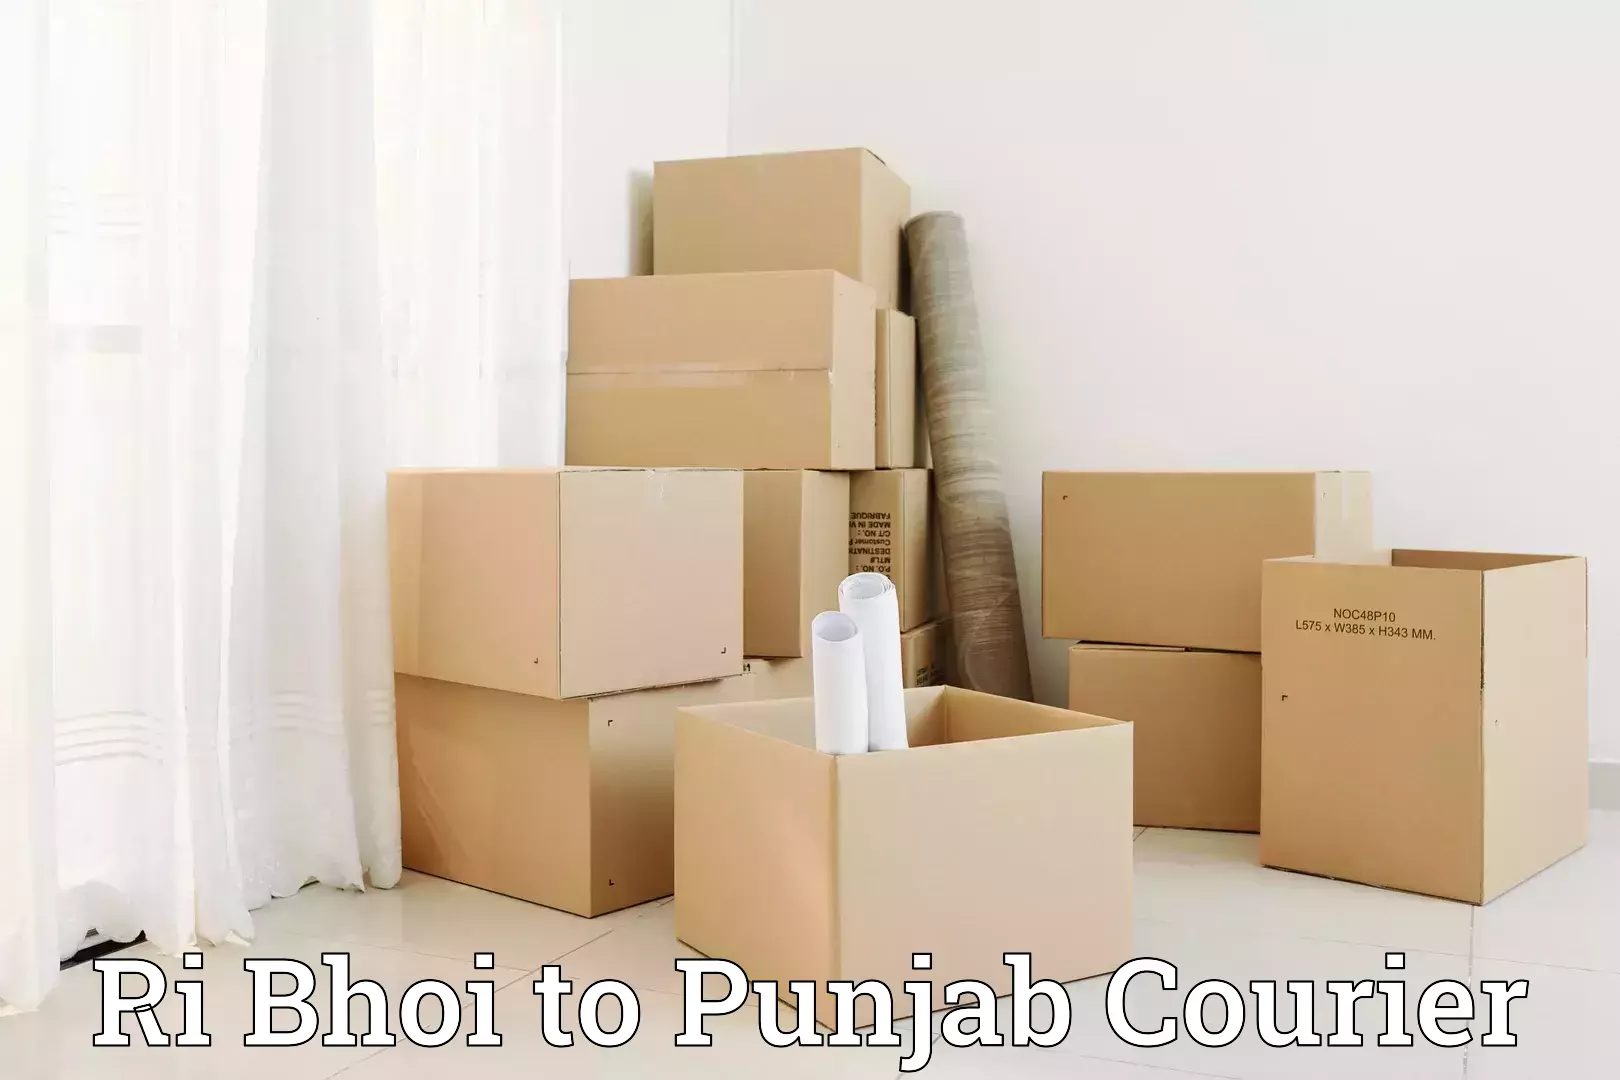 Moving and storage services Ri Bhoi to Jalandhar